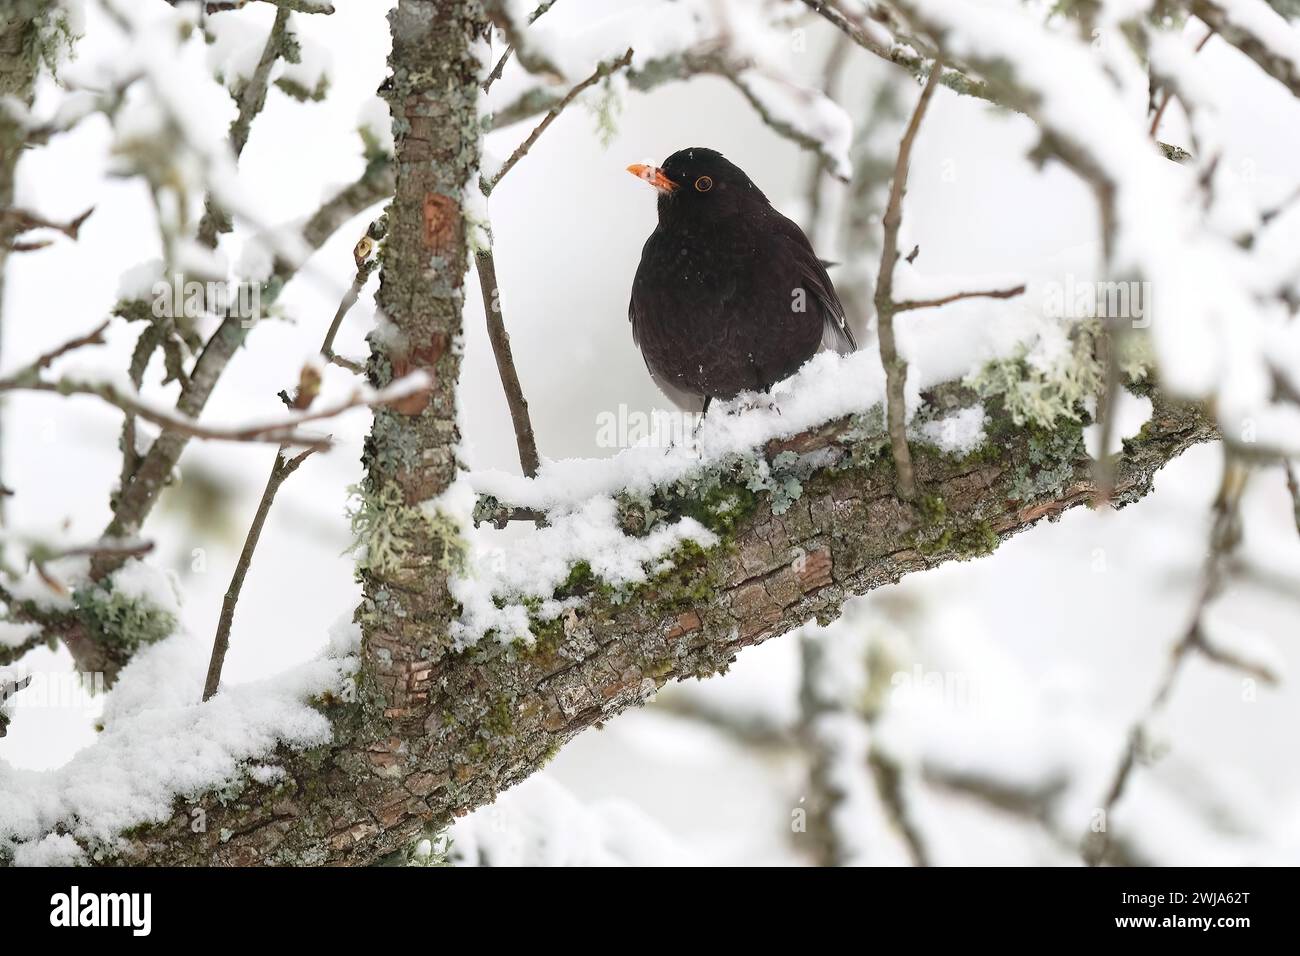 A blackbird with a bright orange beak sits on a snow-covered branch in a wintry forest scene Stock Photo